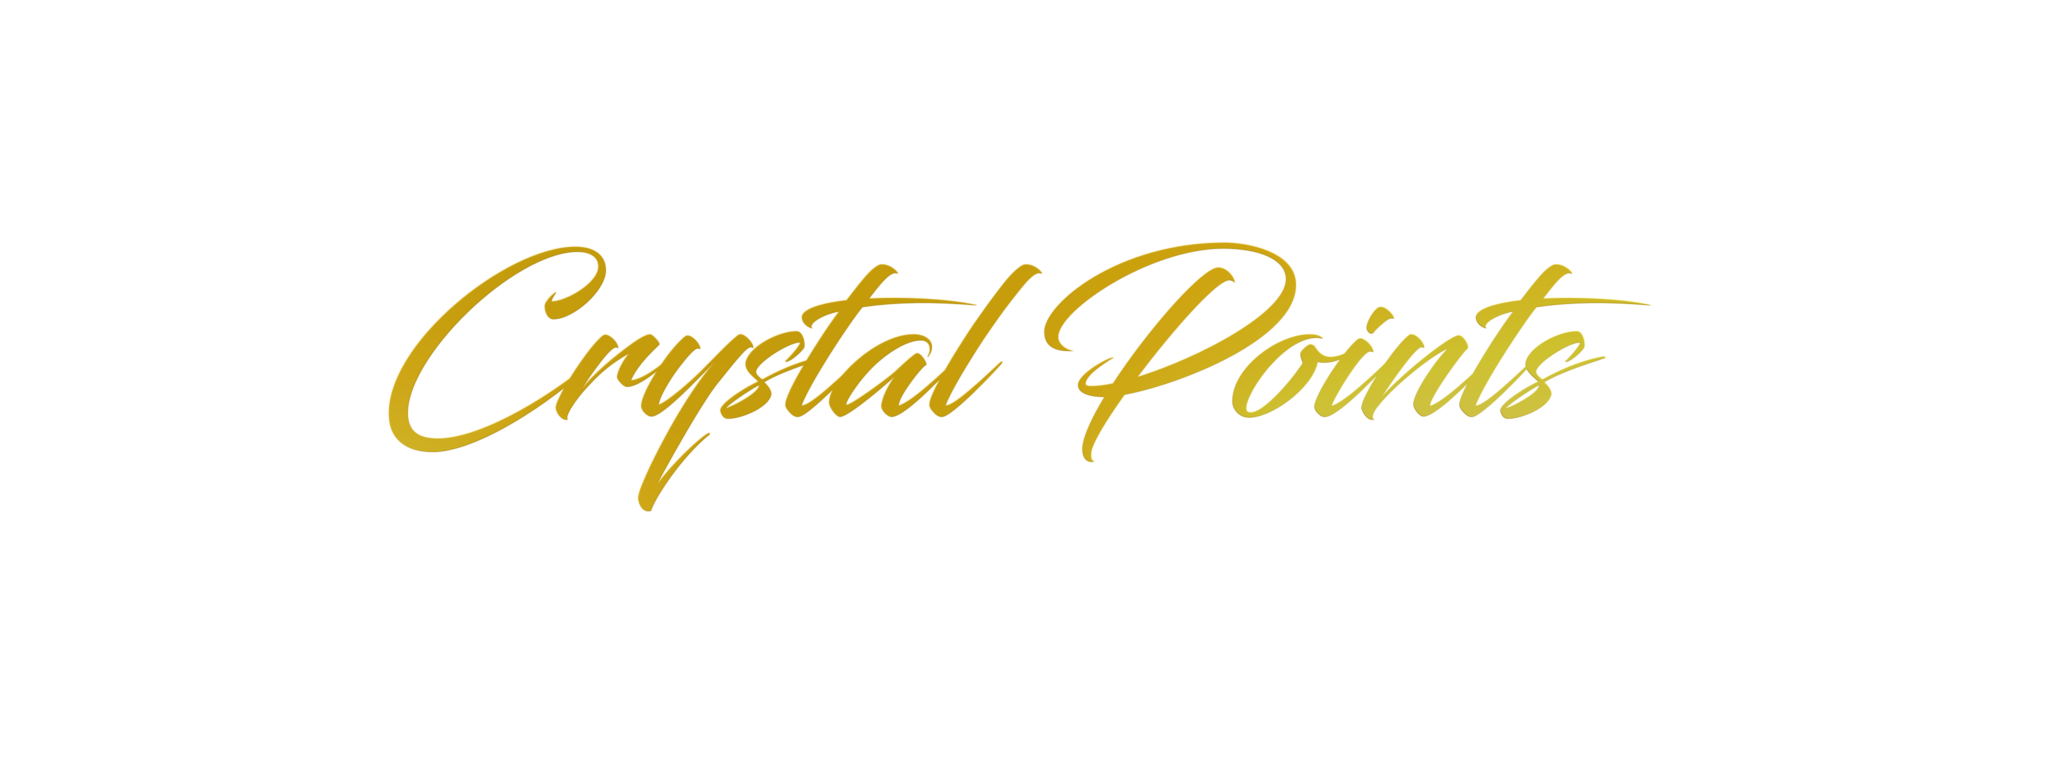 Gold Crystal Points Lettering Group